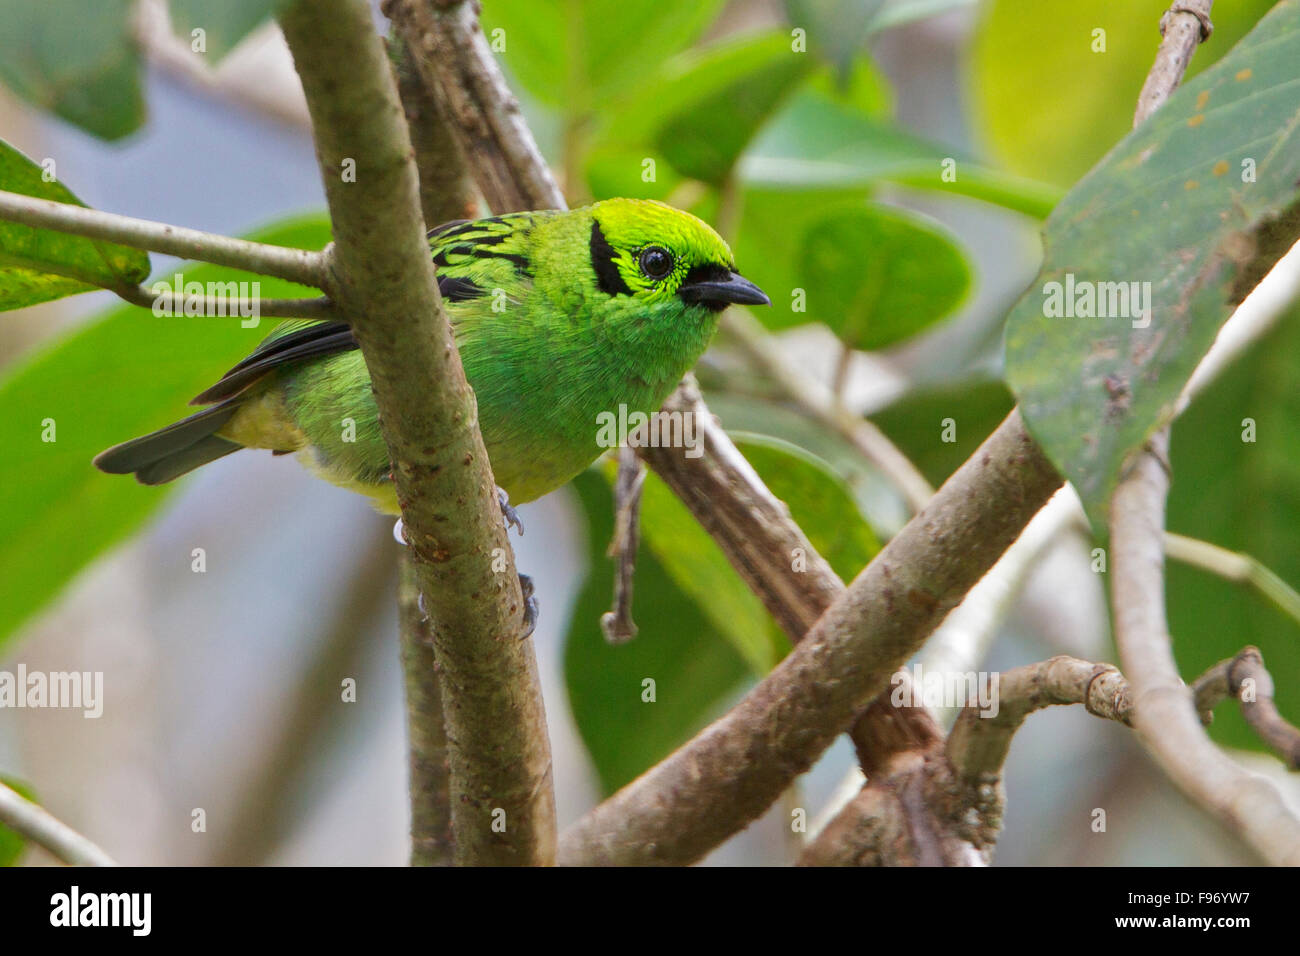 Emerald Tanager (Tangara florida) perched on a branch in Costa Rica, Central America. Stock Photo